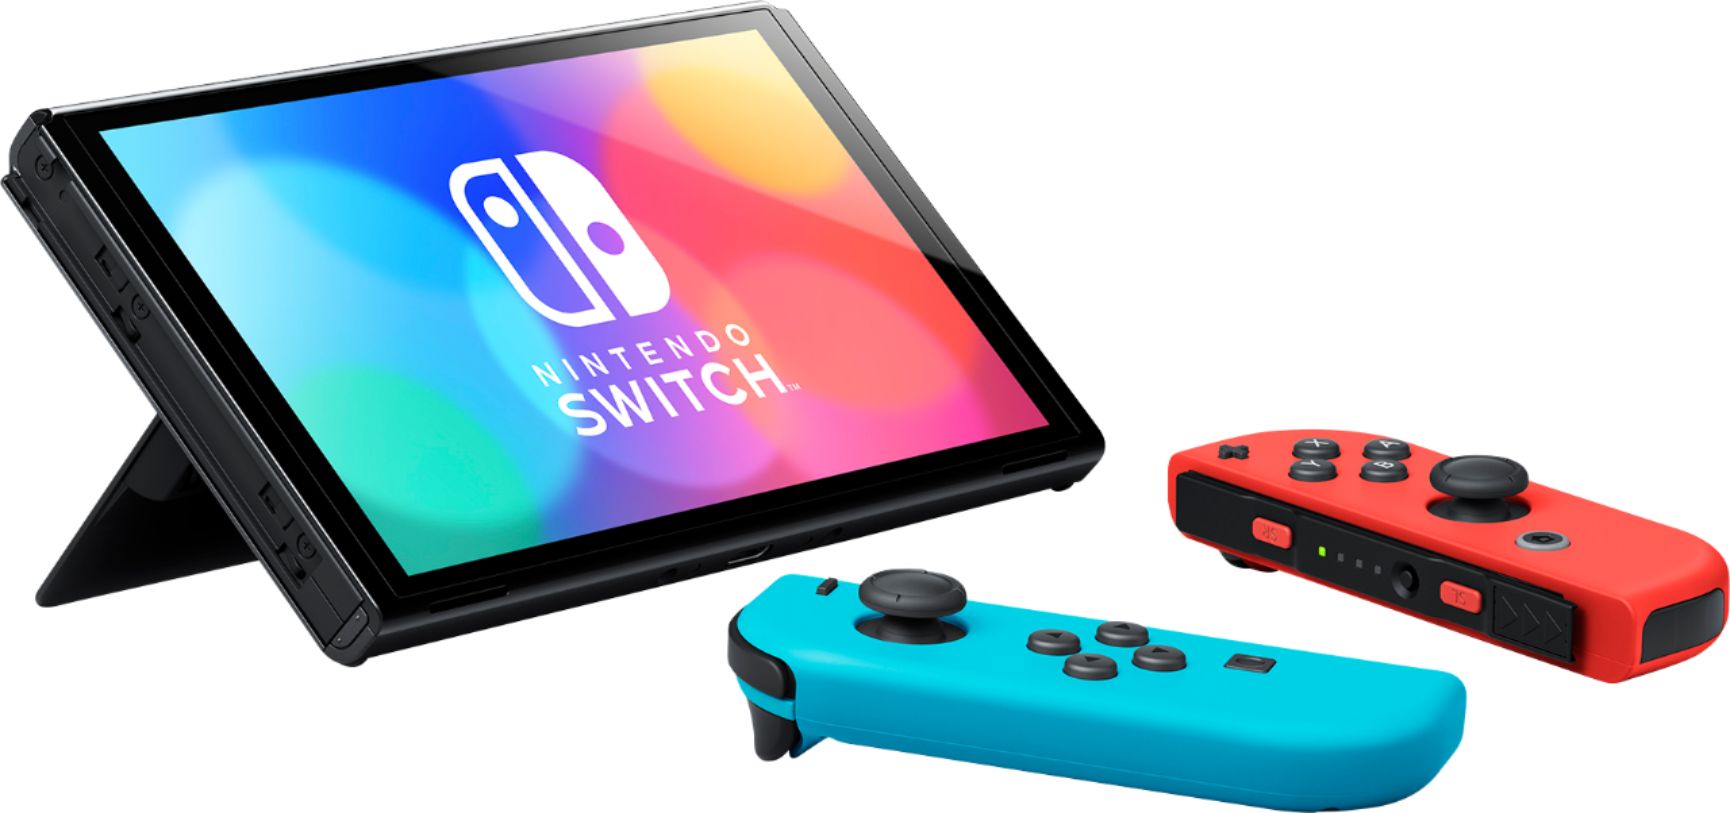 Game Console Portabila Nintendo Switch OLED Model, 64GB, Neon Blue and Neon Red, 7" Oled screen, Three modes: Handheld / TV / Tabletop, Wide and Adjustable stand, Built-in wired LAN port in dock-station